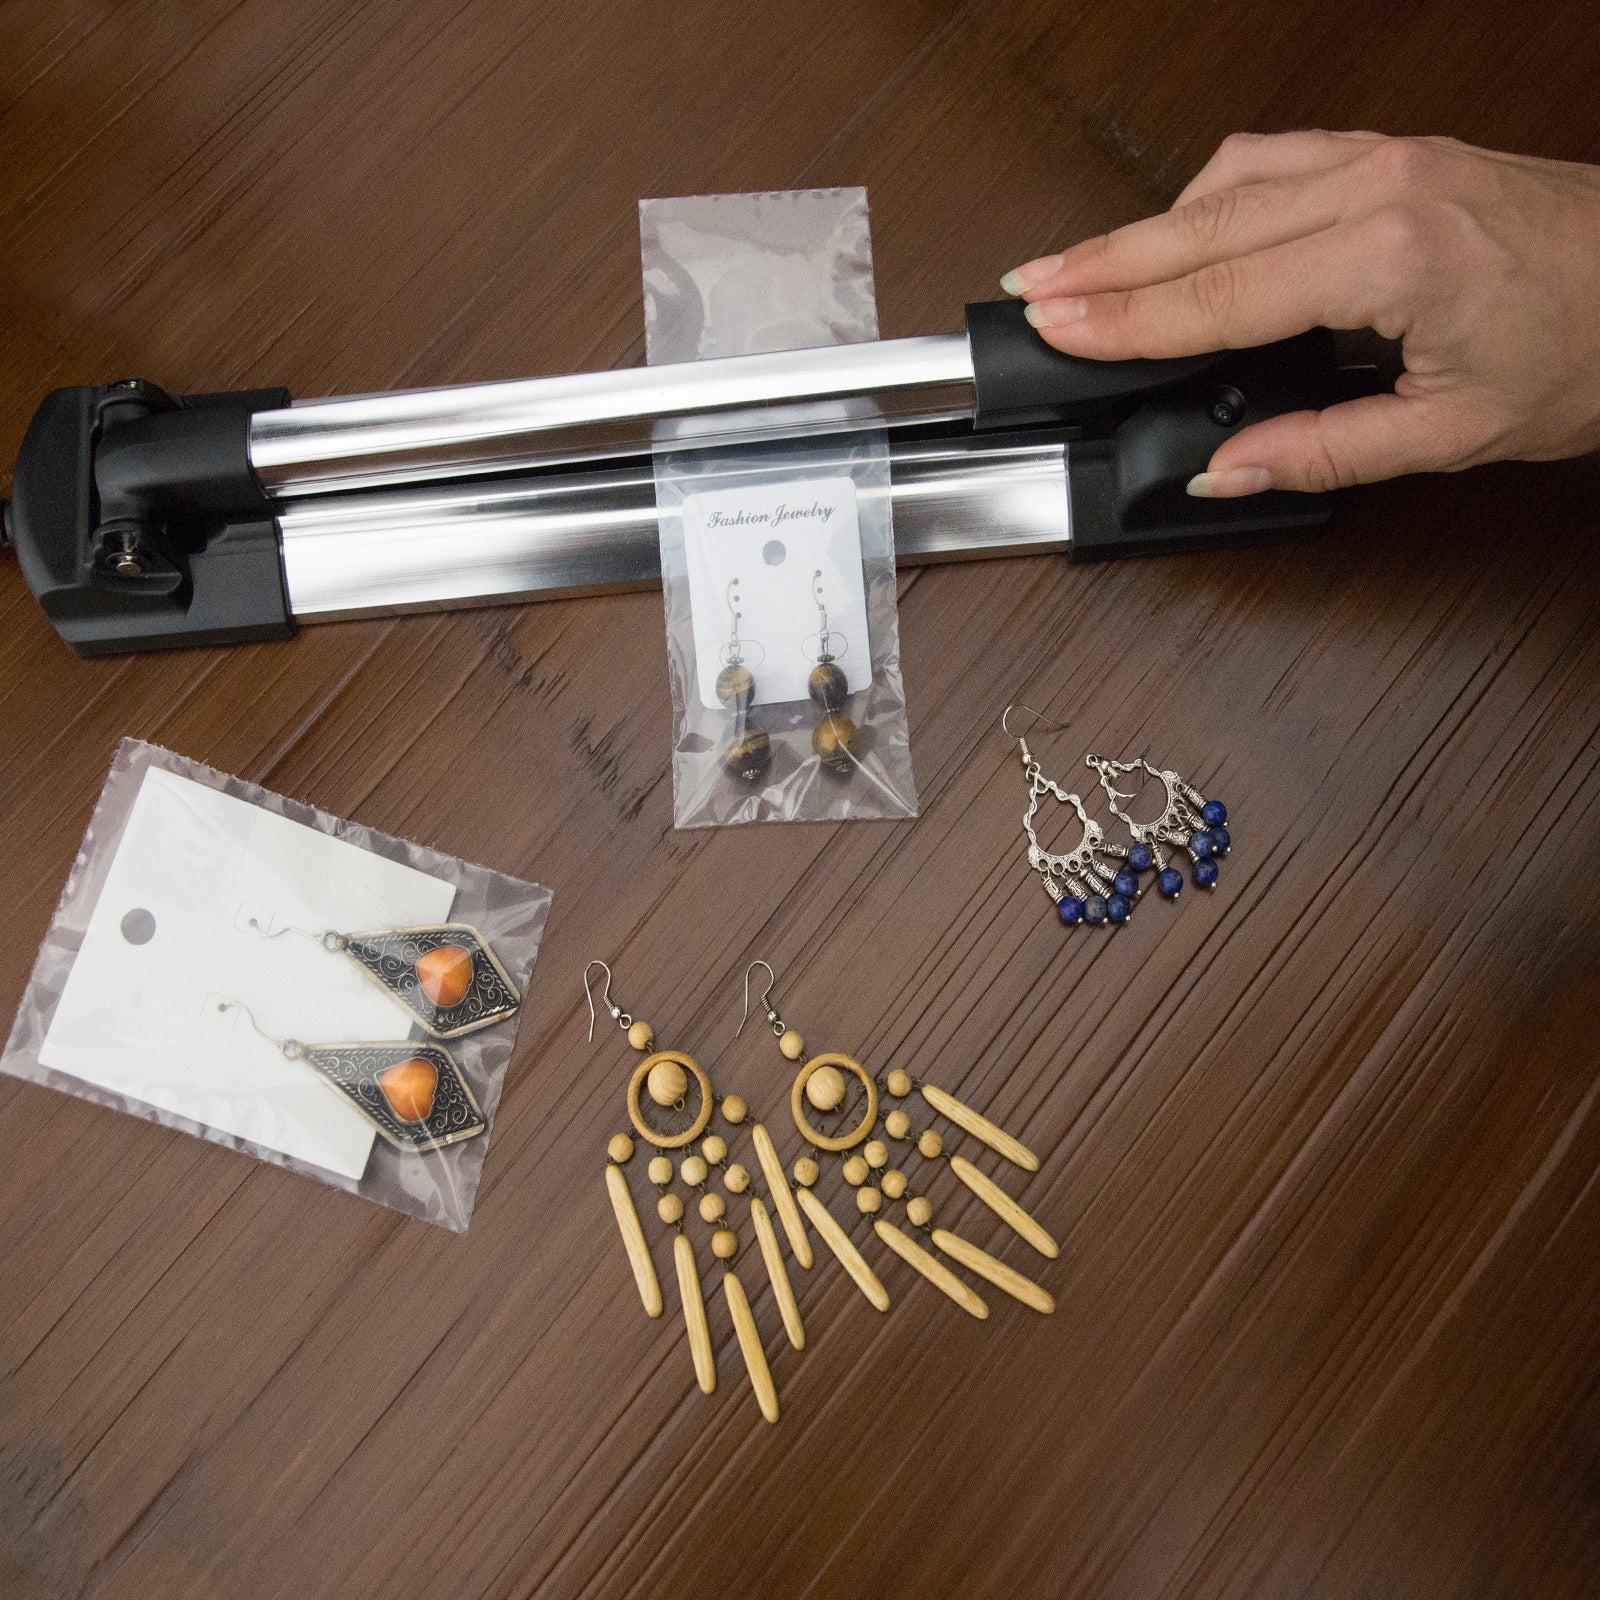 Top view of a manual Impulse Heat Sealer being used to seal a sealable bag with hand crafted jewelry inside